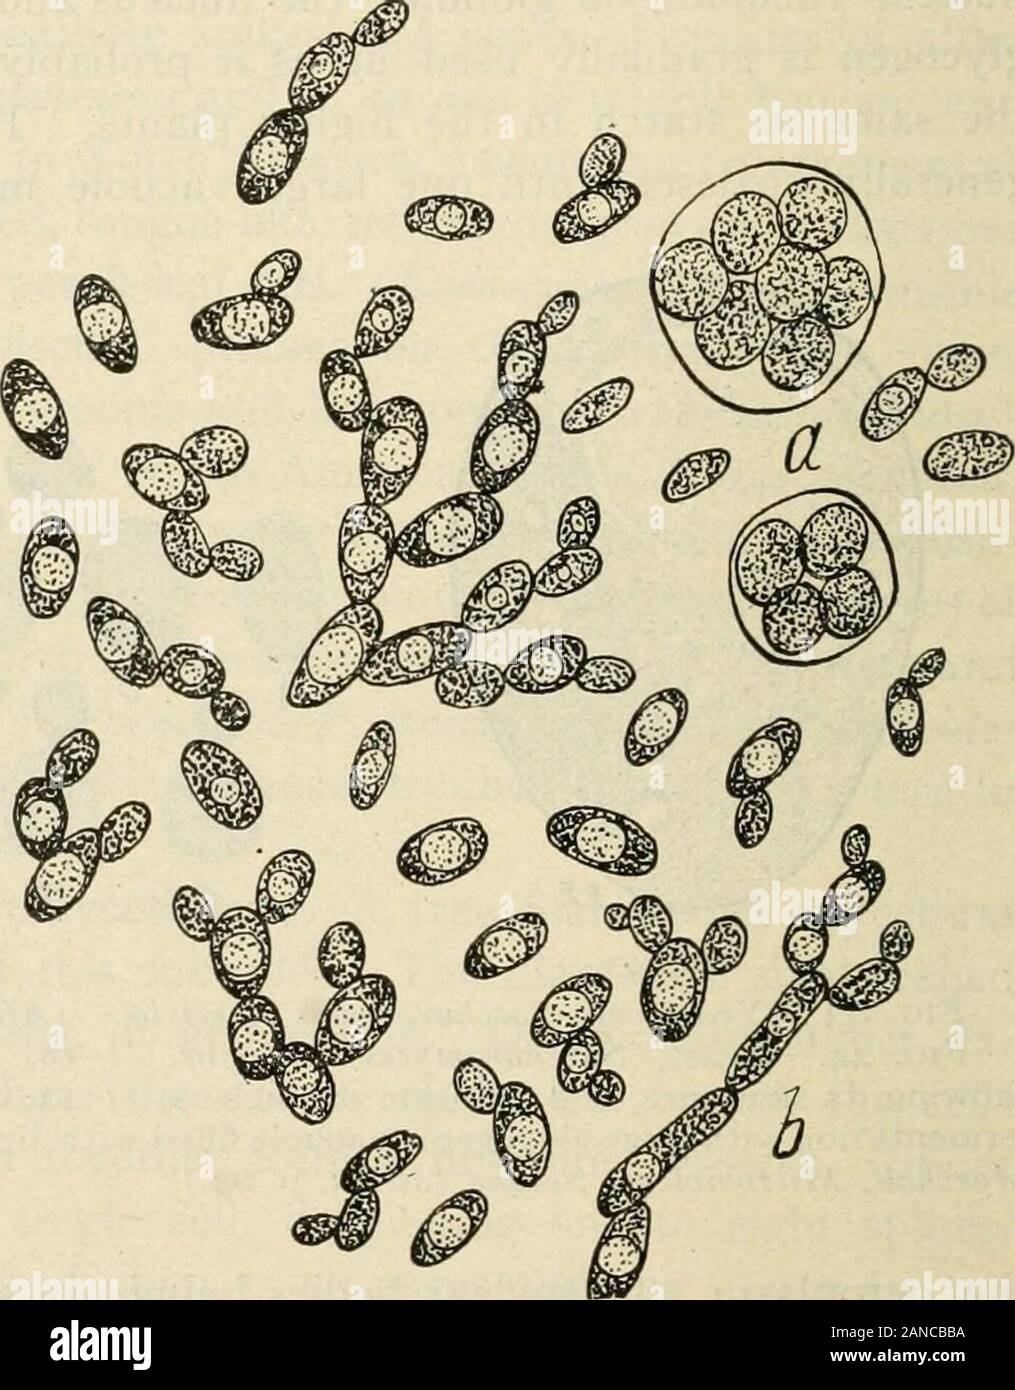 A text-book of mycology and plant pathology . Fig. 45. Fig. 46. Fig. 45.—Young yeast cells, Saccharotnyces ellipsoideus, with nuclei and divisionof nuclei. {After Marshall, Microbiology, Second edition, p. 64.) Fig. 46.—Yeast, Saccharomyces cerevisice, the variety known as brewers bottomyeast; a, spore formation; b, elongated cells. {After Schneider, Pharmaceutical Bac-teriology, p. 144.) the mother cell. In spore formation, the chromation which is scatteredthrough the cytoplasm is absorbed more or less completely into thenucleolus which elongates and divides by a constriction in its middlepar Stock Photo